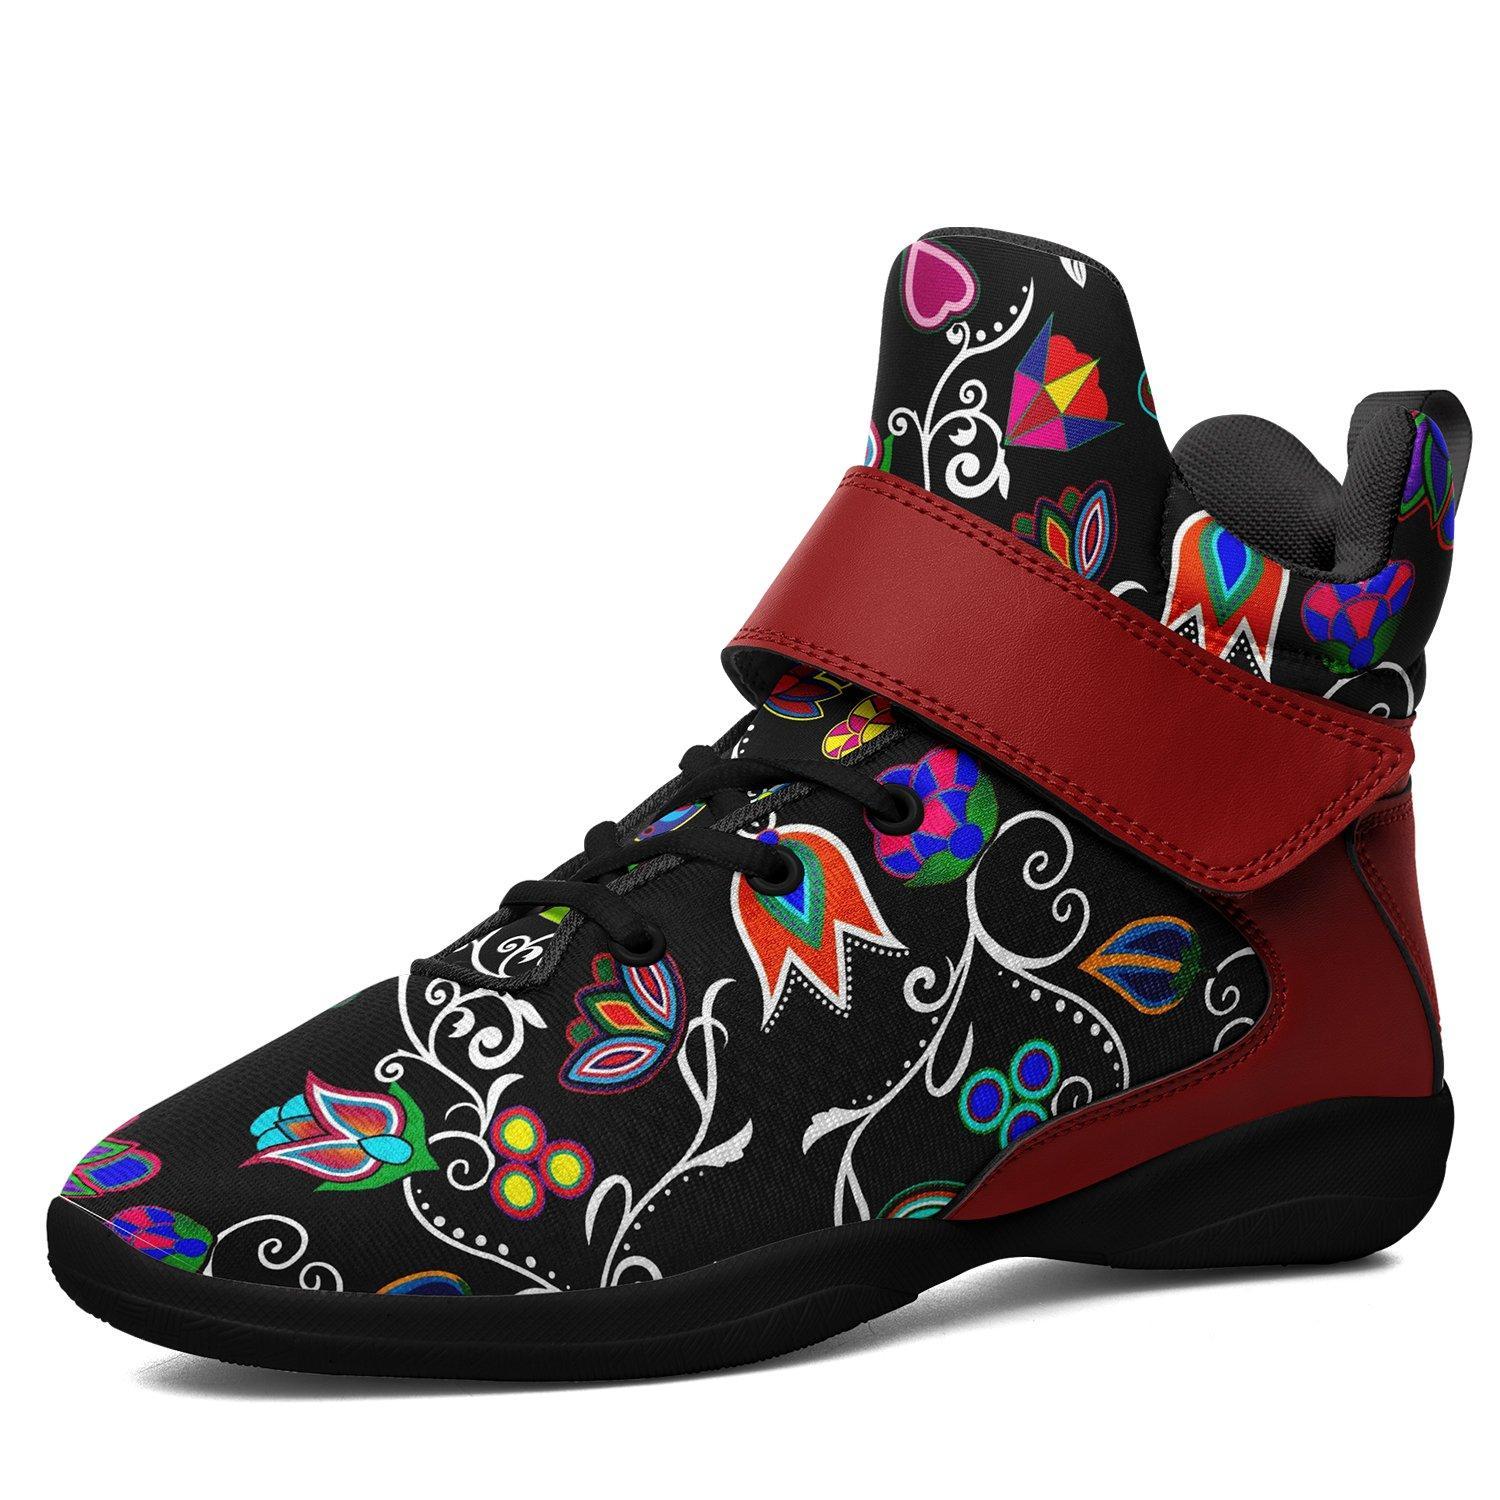 Indigenous Paisley Black Ipottaa Basketball / Sport High Top Shoes - Black Sole 49 Dzine US Men 7 / EUR 40 Black Sole with Dark Red Strap 